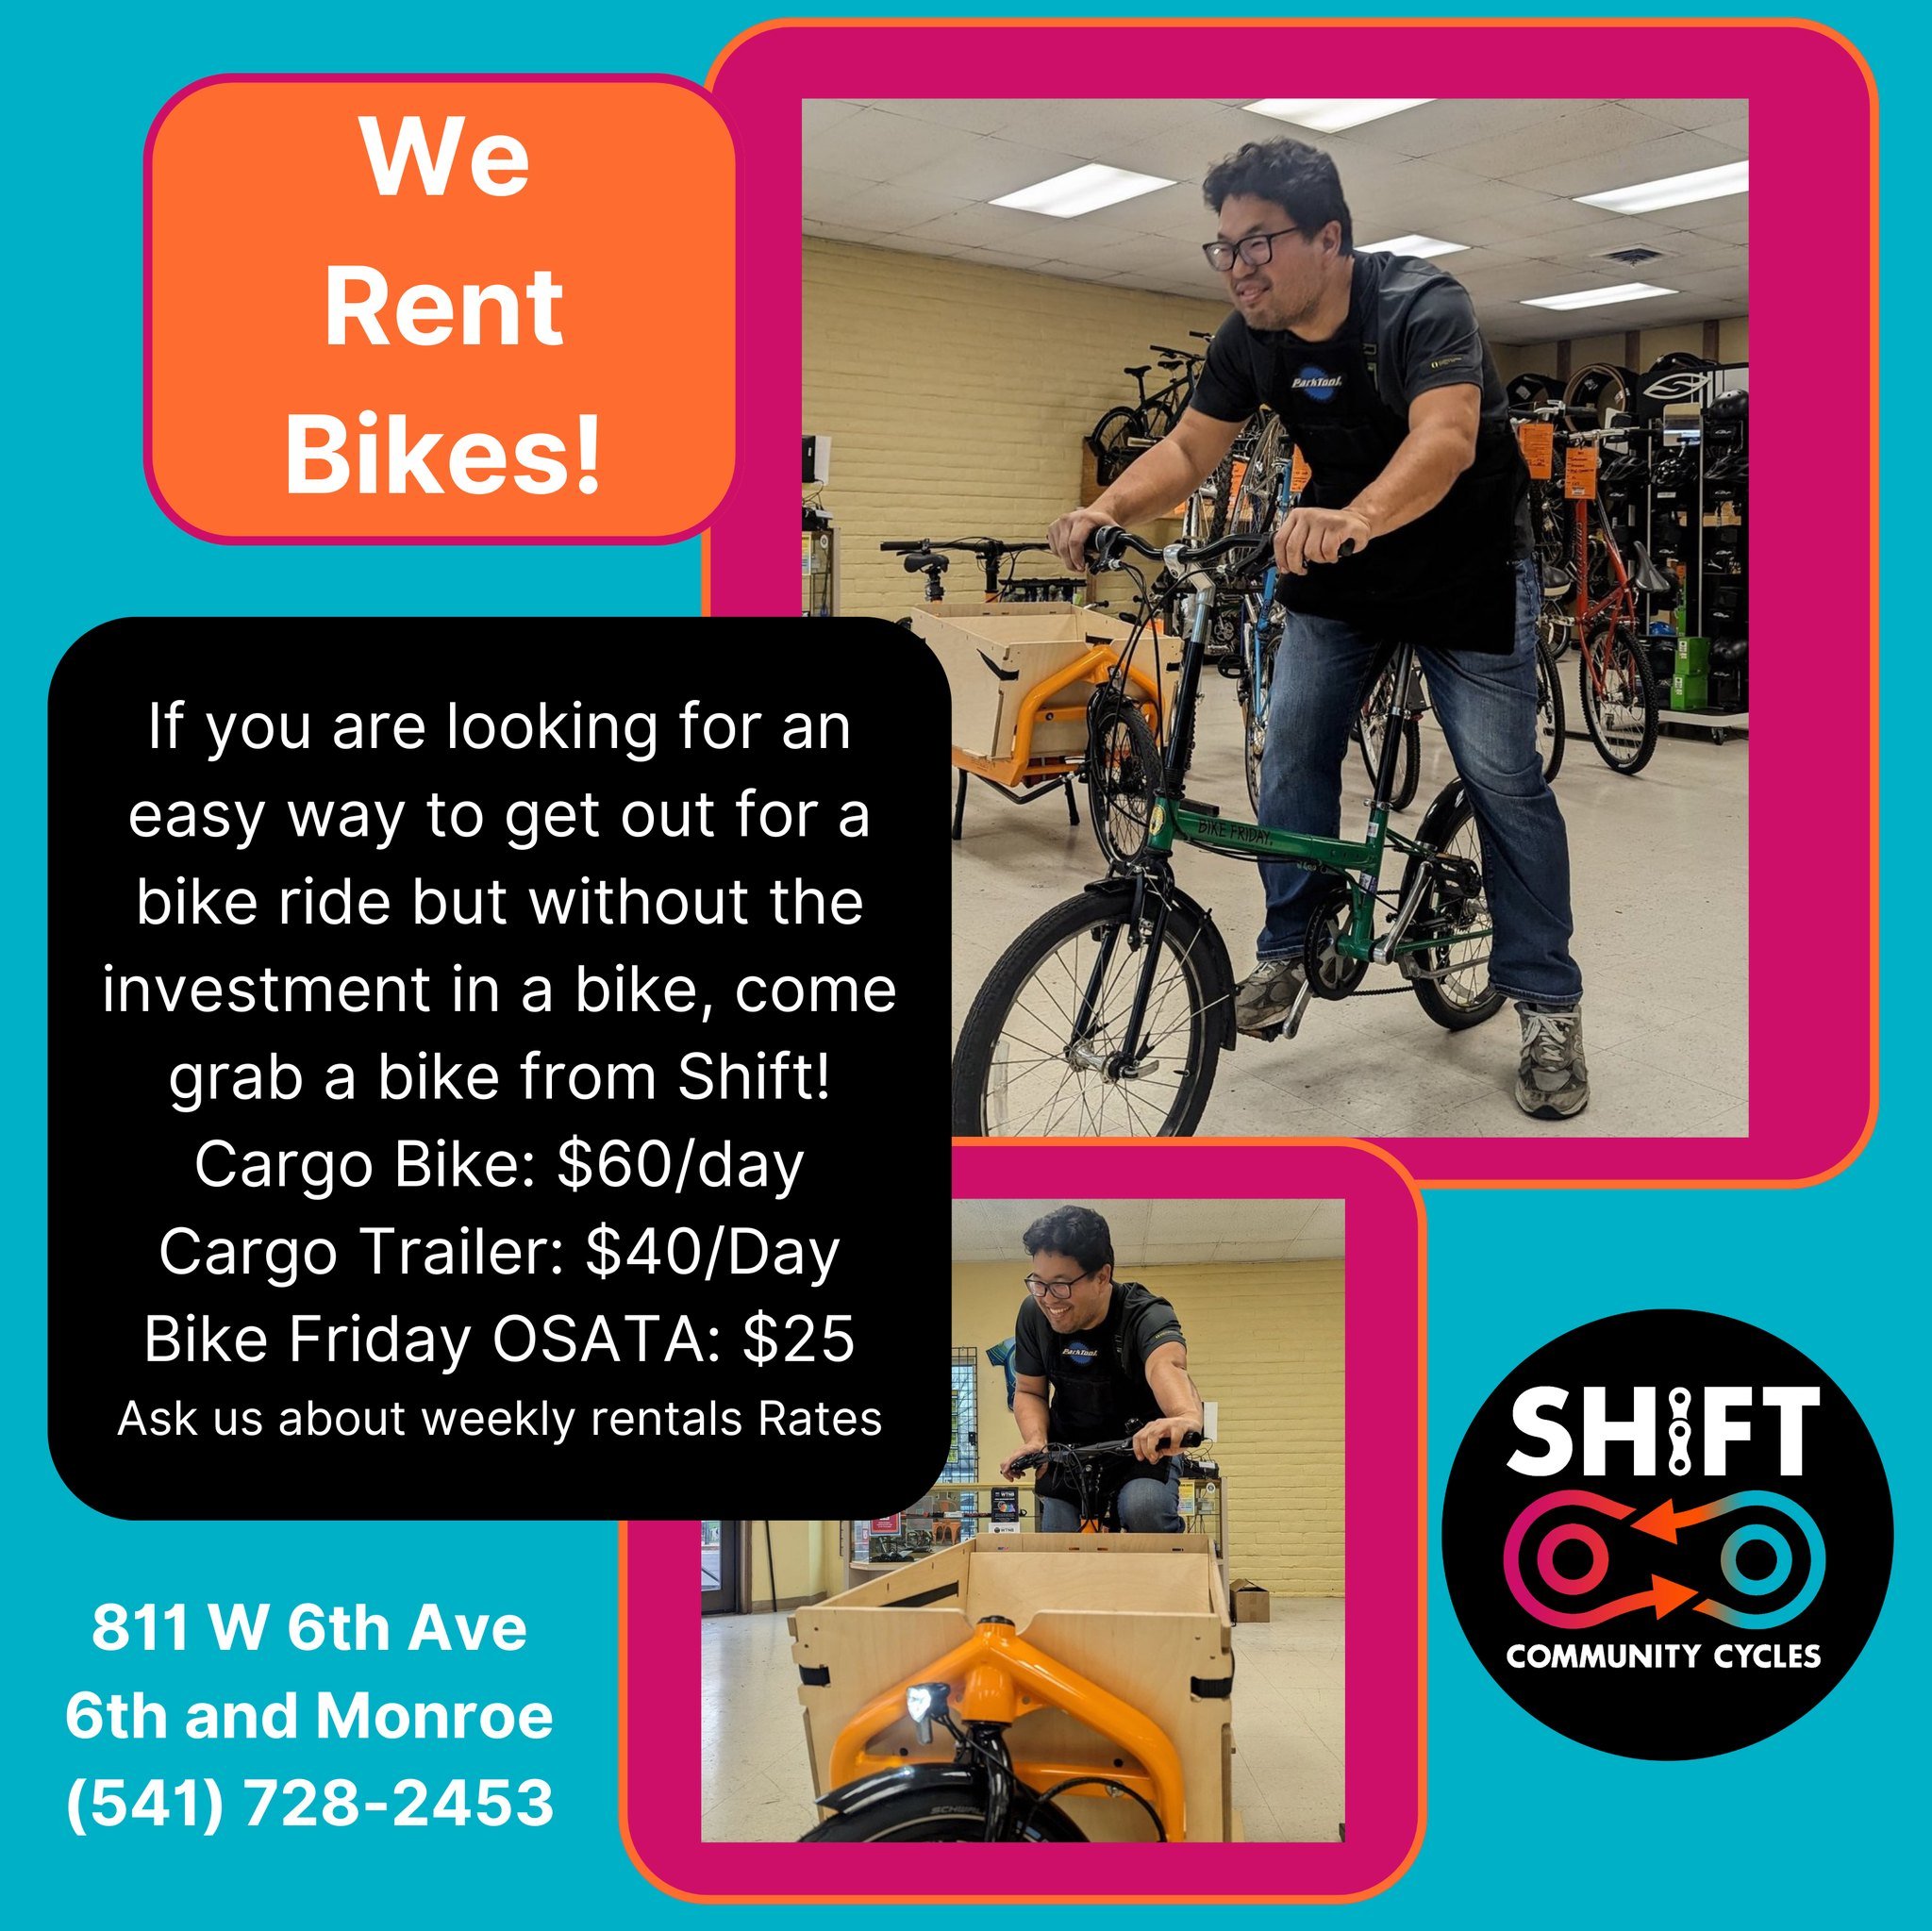 Did you know we rent bikes? Well yes, yes we do and we would love to get you out on a rental. We have a Front-Loader E-Cargo bike and Bike Friday OSATA bikes which are adjustable to fit almost anyone(nice and compact as well). Come on down to the sho